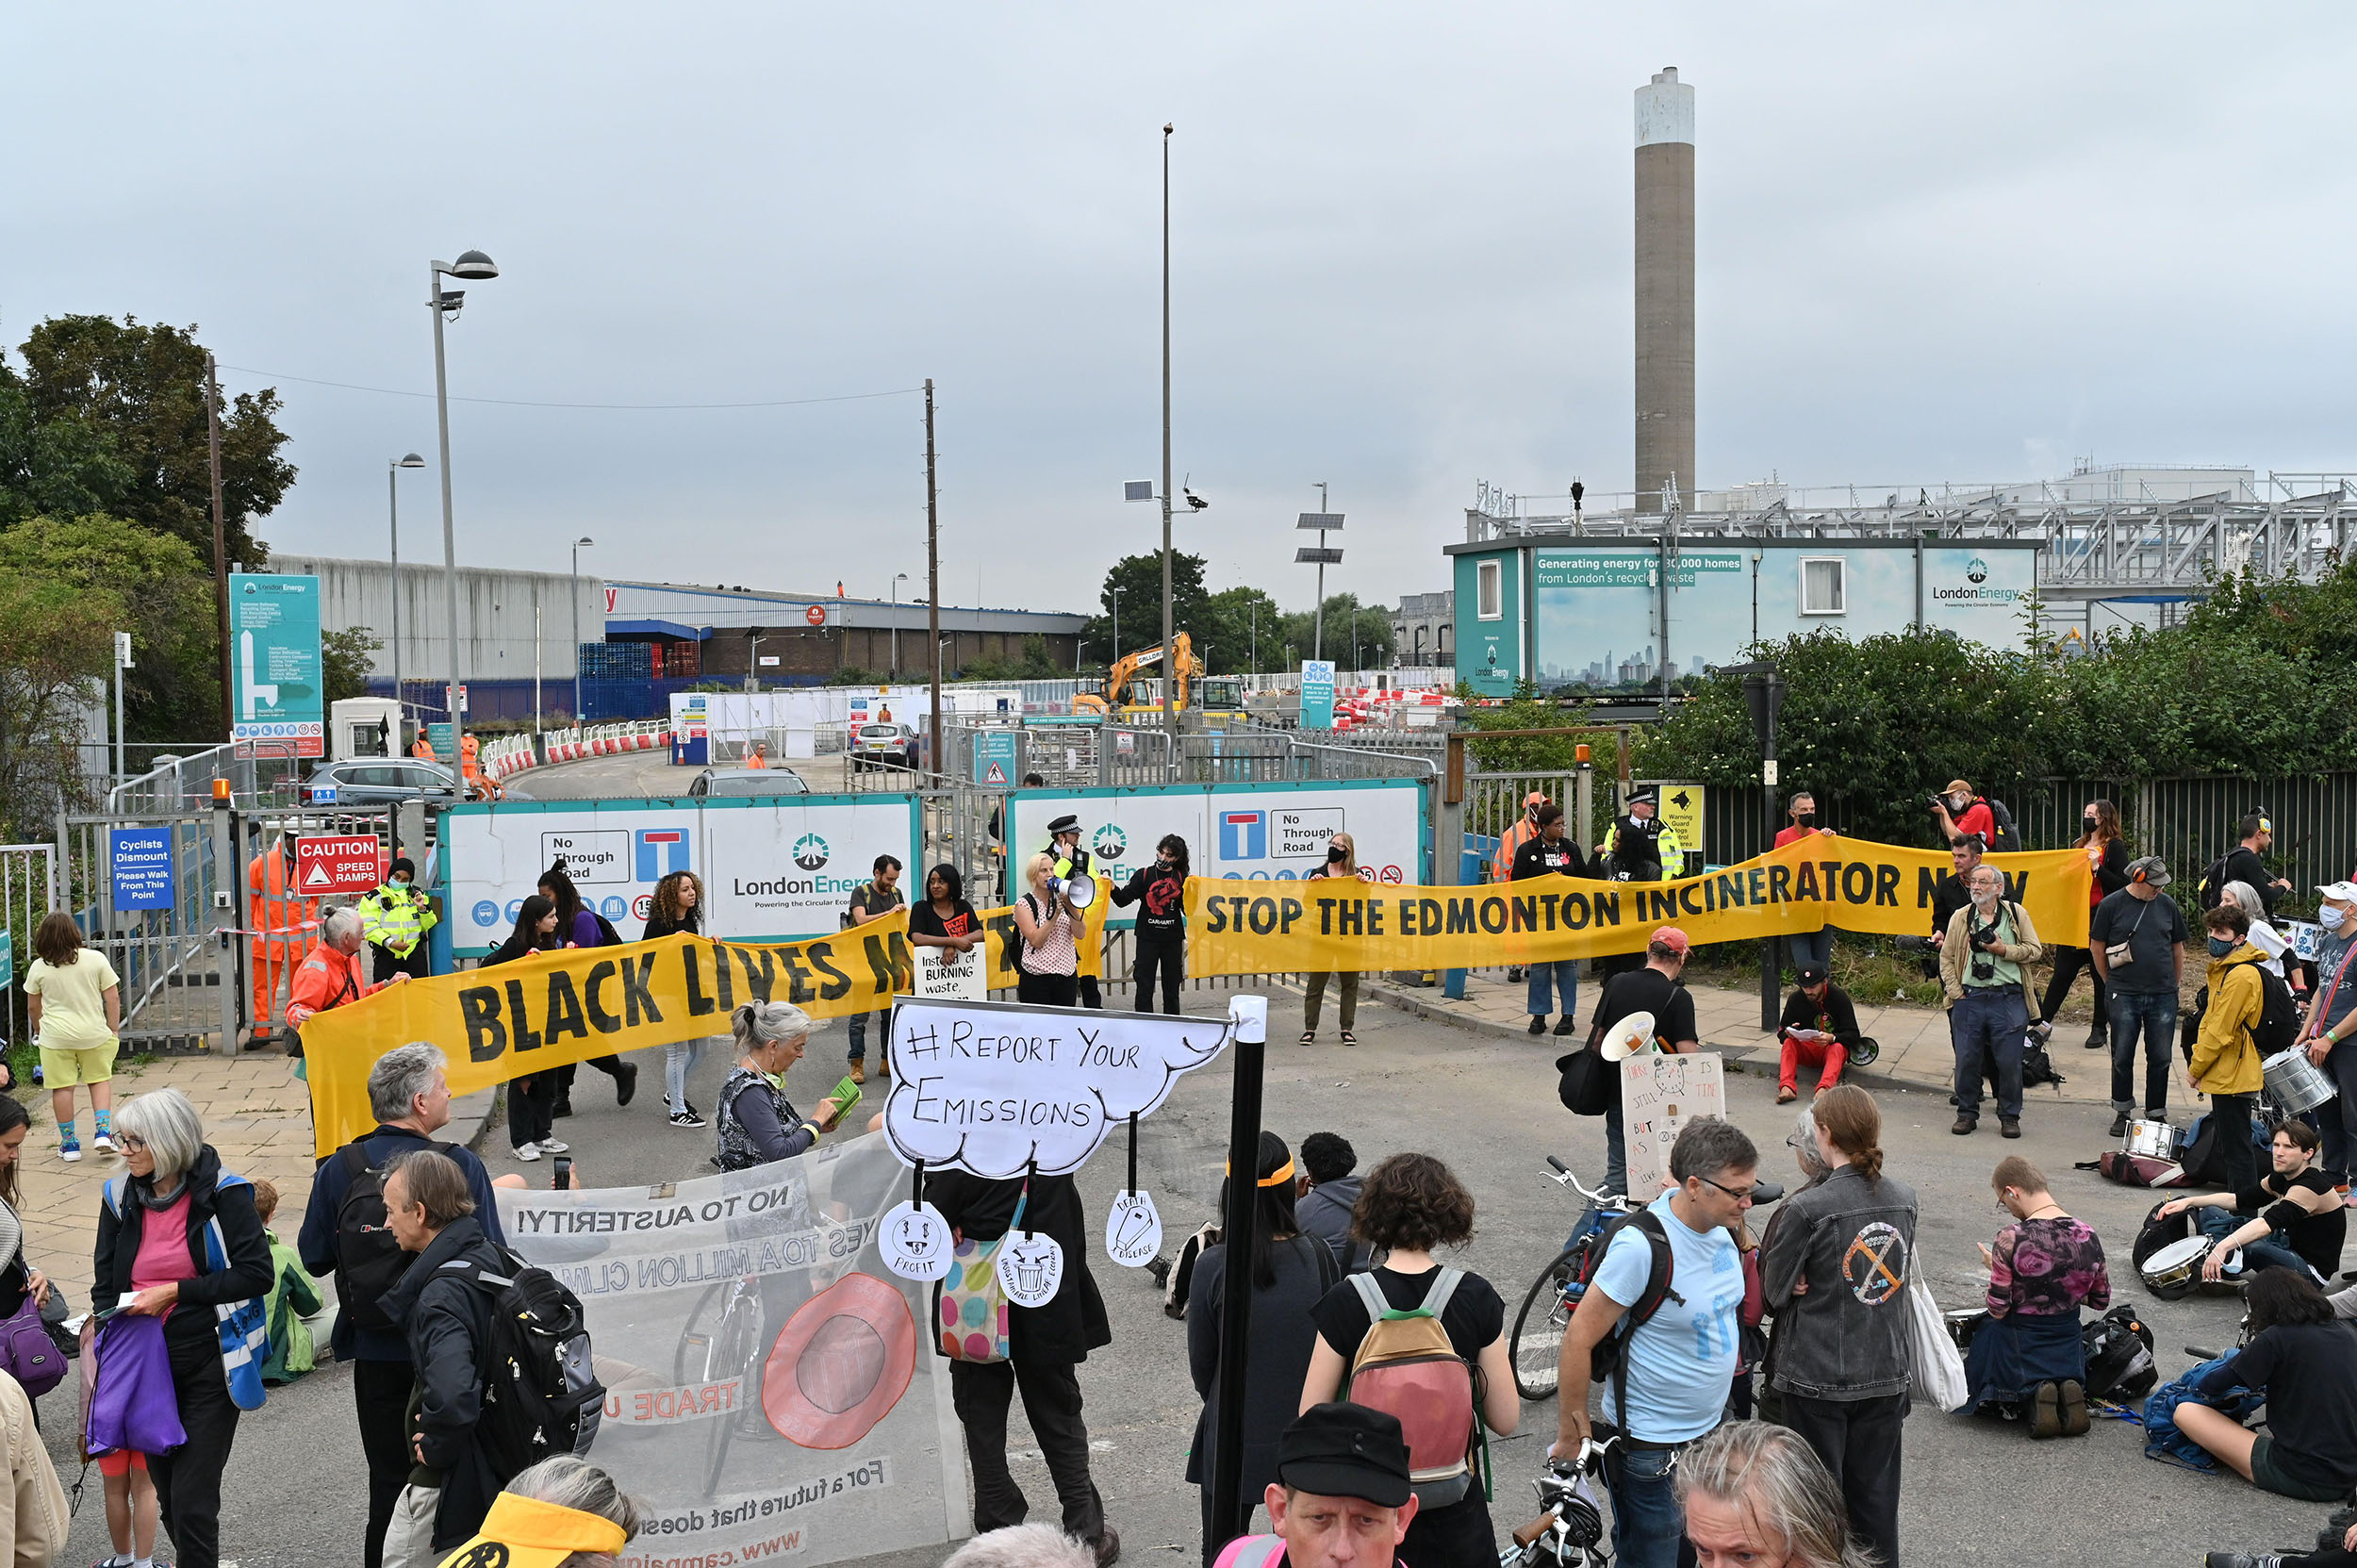 A loose crowd gathered outside the gates to an industrial facility. Large banners read 'Black lives matter' and 'Stop the Edmonton Incinerator'.